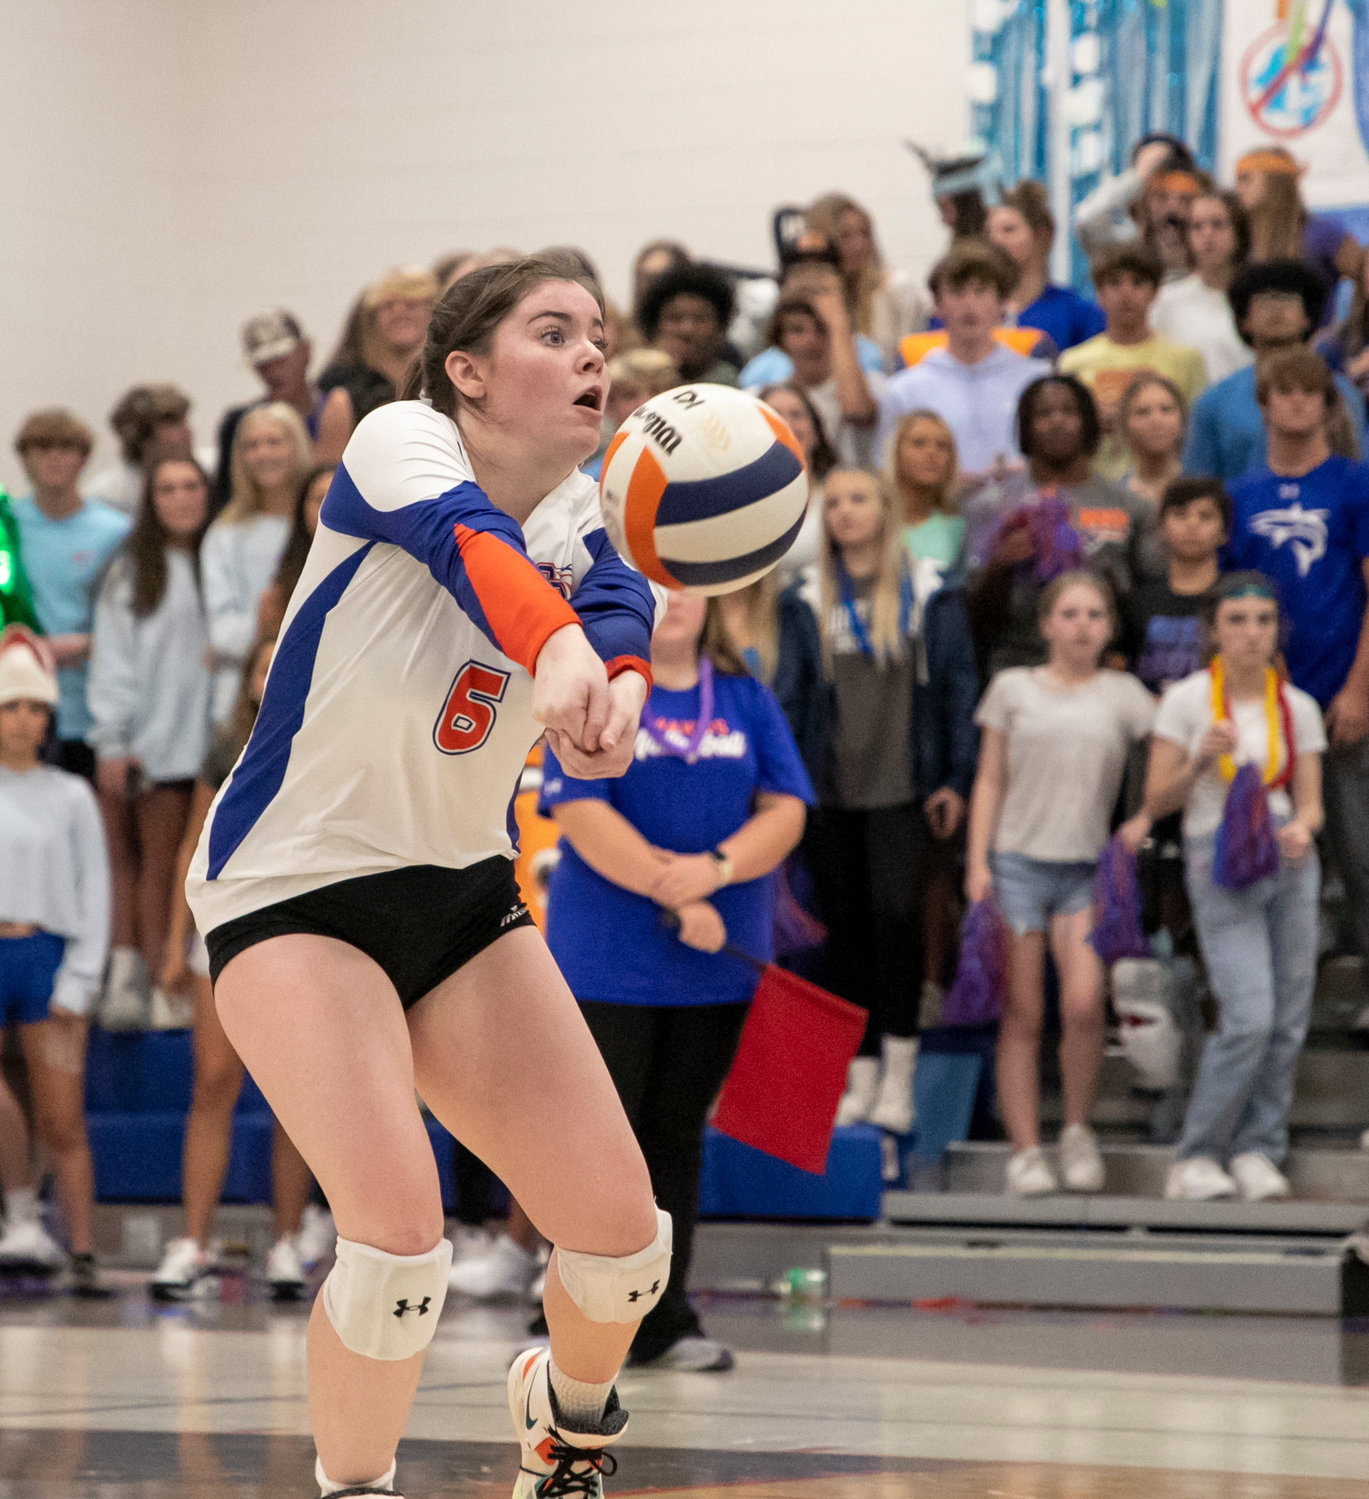 Orange Beach senior Leyni Young records a dig during the Makos’ tri-match against the Gulf Shores Dolphins at home Aug. 25. Orange Beach was the 24th-ranked team in MaxPreps’ updated state rankings entering the final week of the regular season.